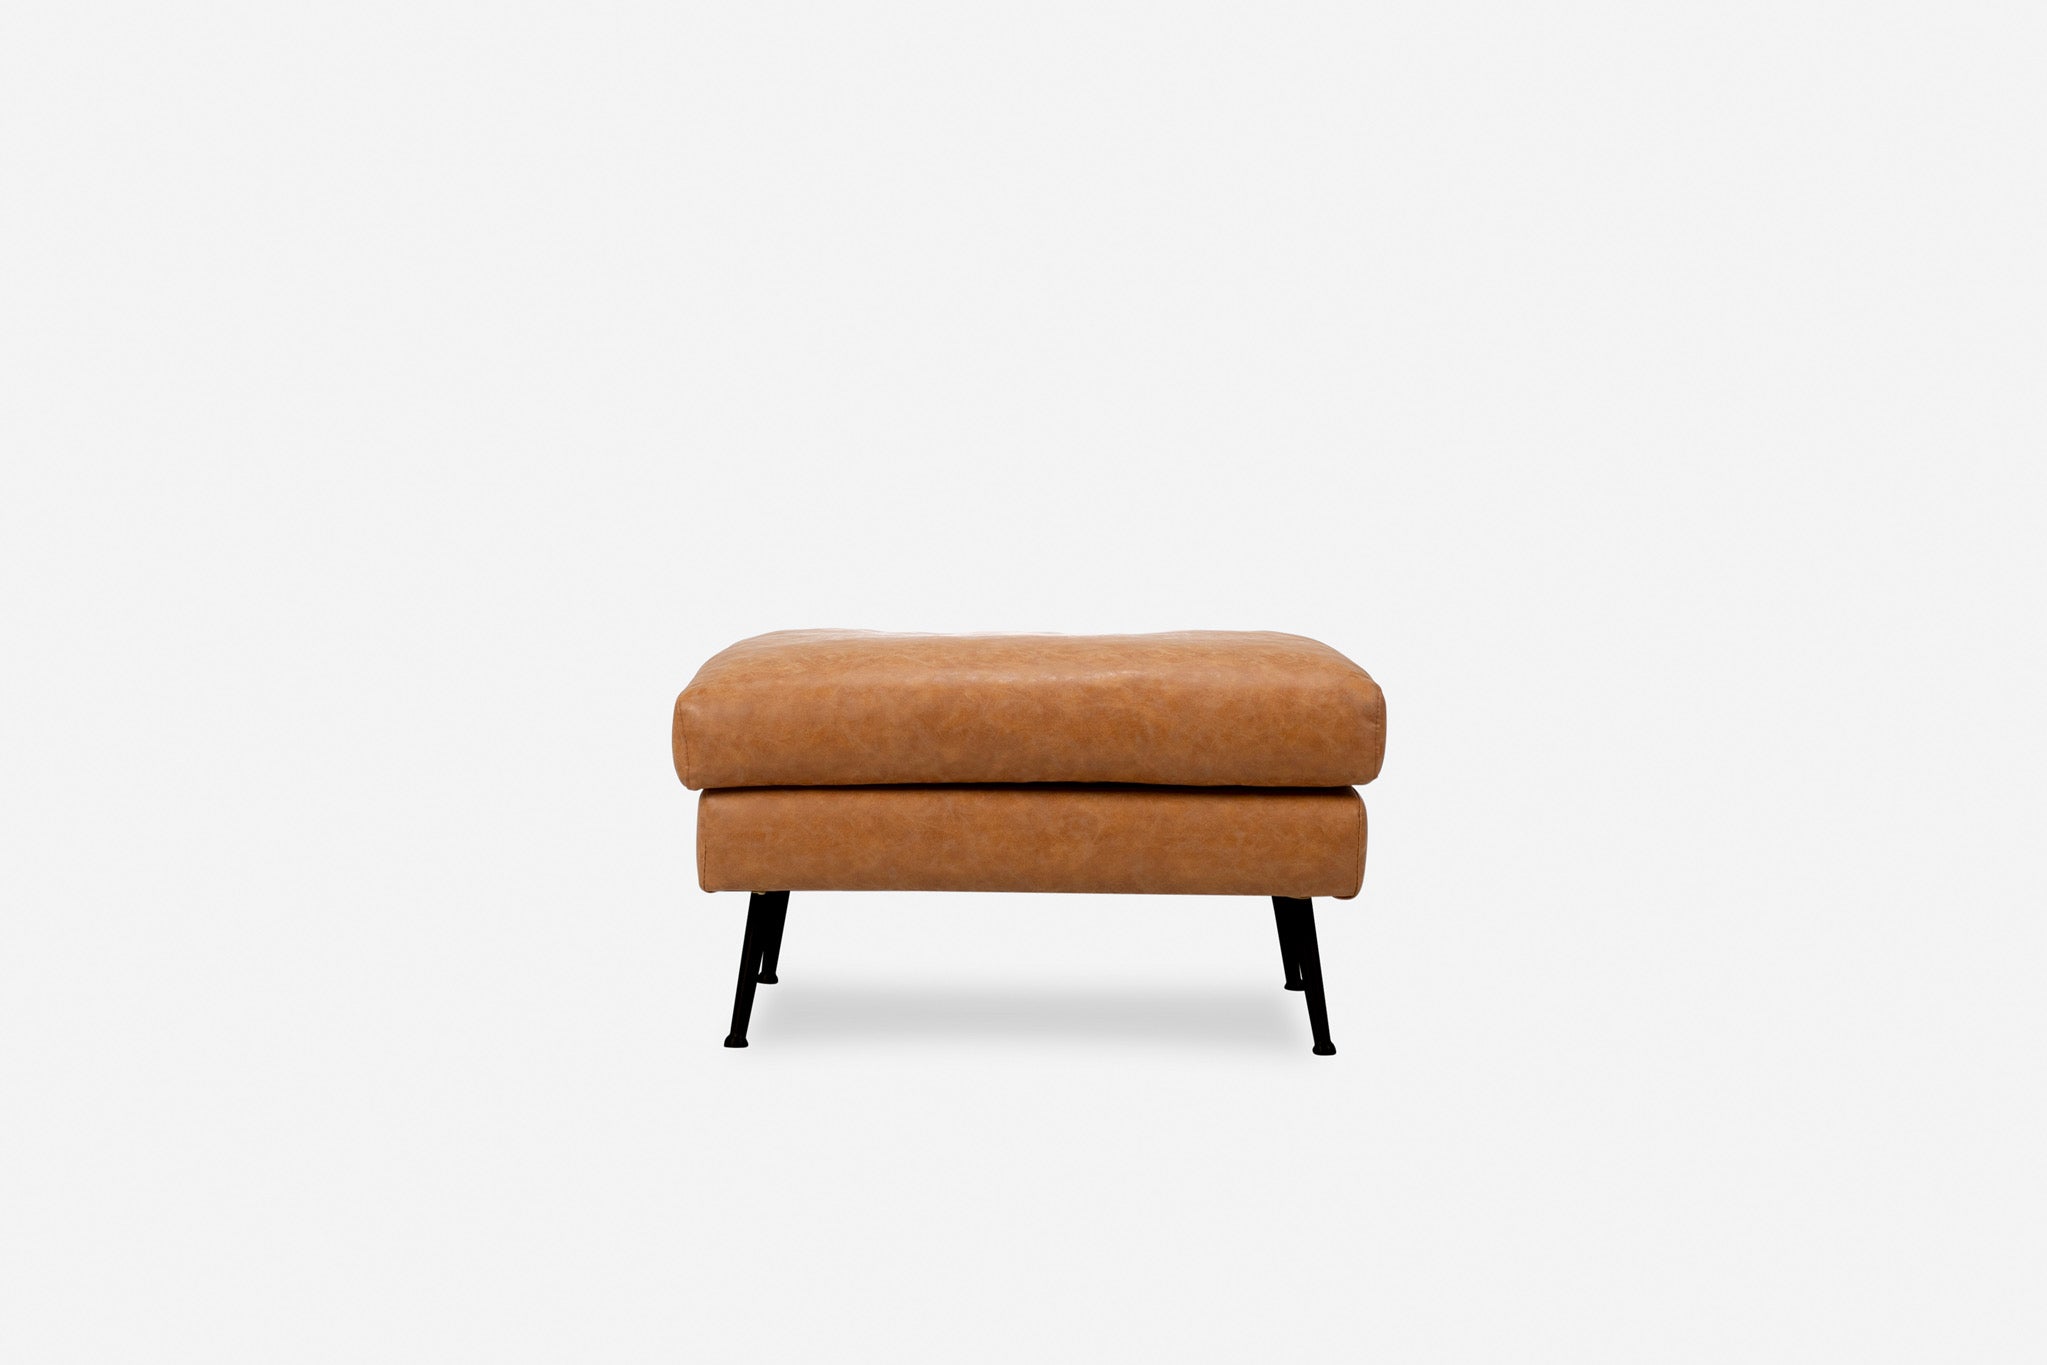 park ottoman shown in distressed vegan leather with black legs